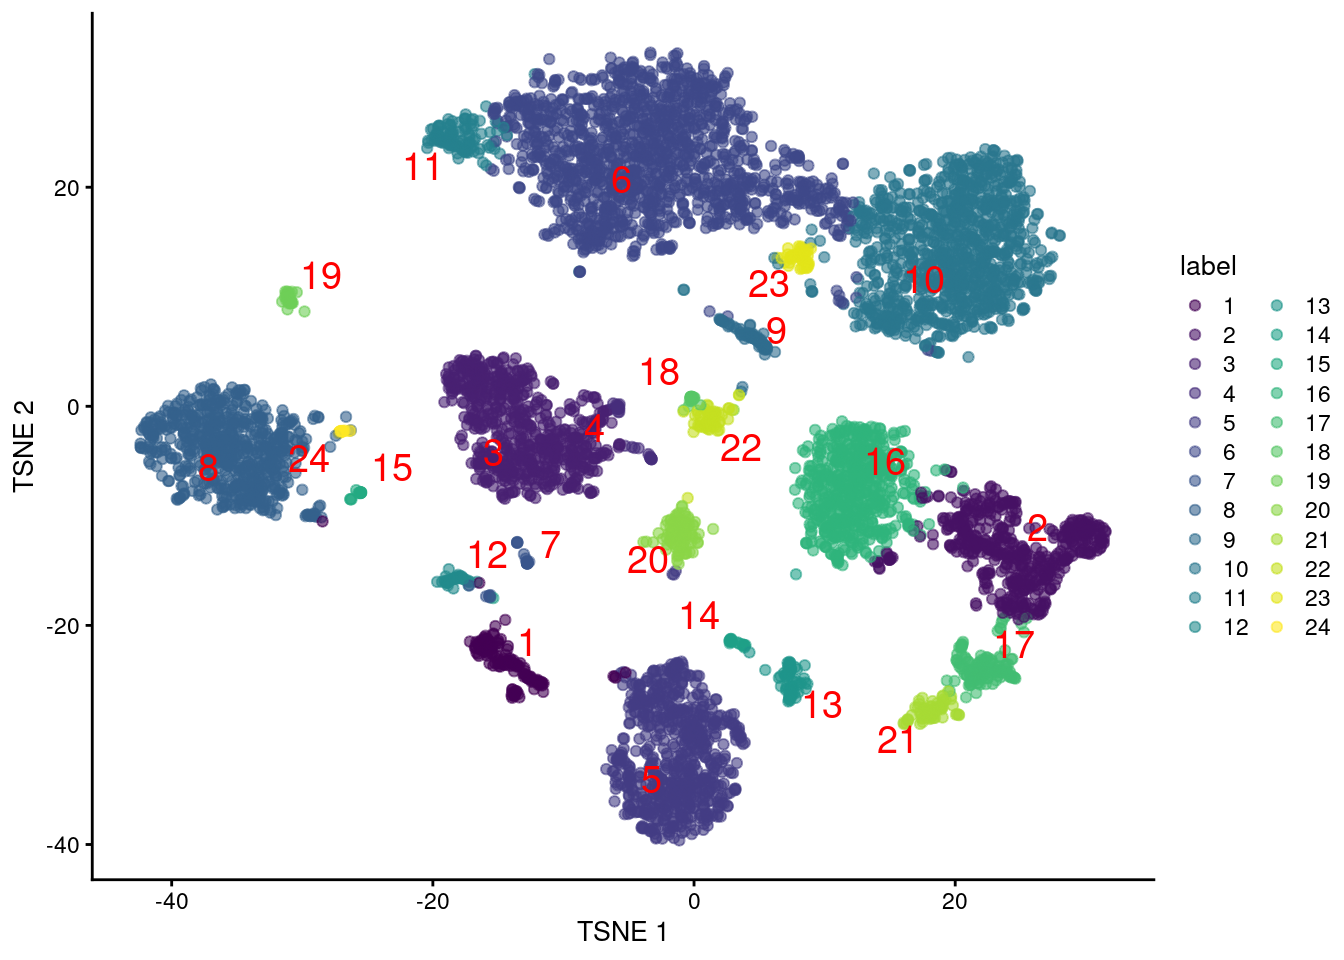 Obligatory $t$-SNE plot of PBMC dataset based on its ADT expression values, where each point is a cell and is colored by the cluster of origin. Cluster labels are also overlaid at the median coordinates across all cells in the cluster.